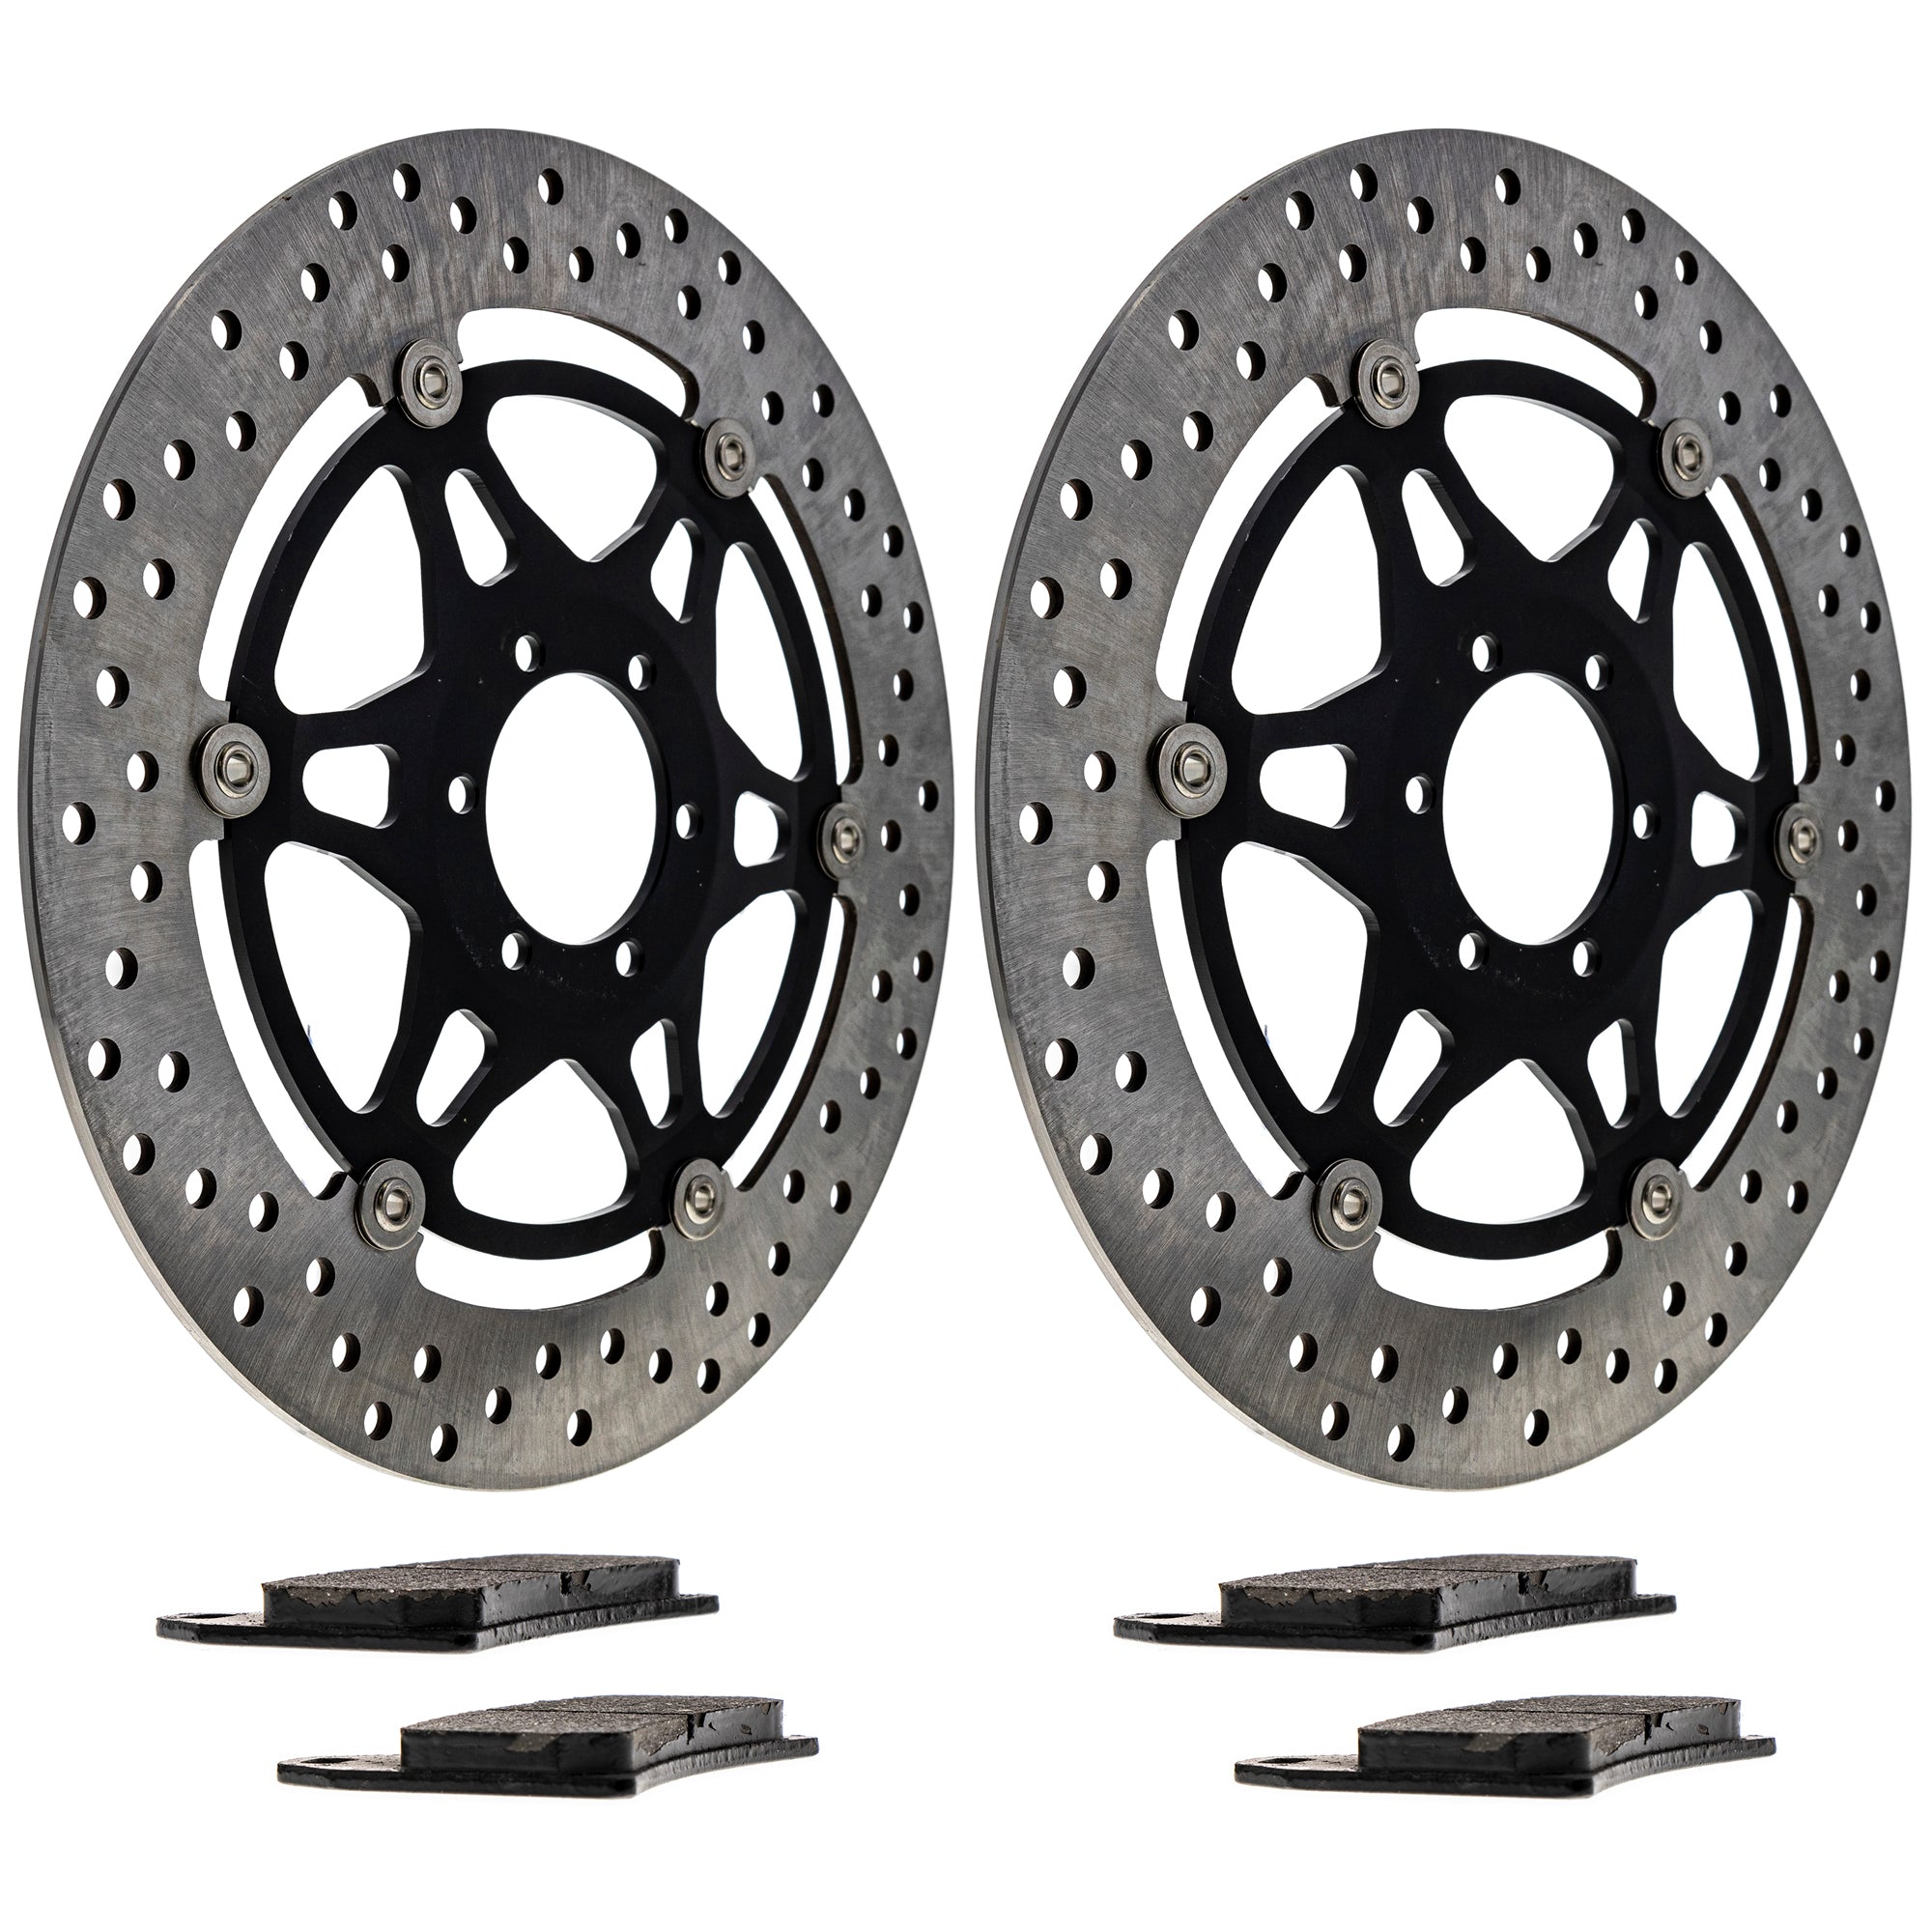 Front Brake Rotors and Pads Kit for Polaris BMW Arctic Cat Textron G650X 60313130000 NICHE MK1007222